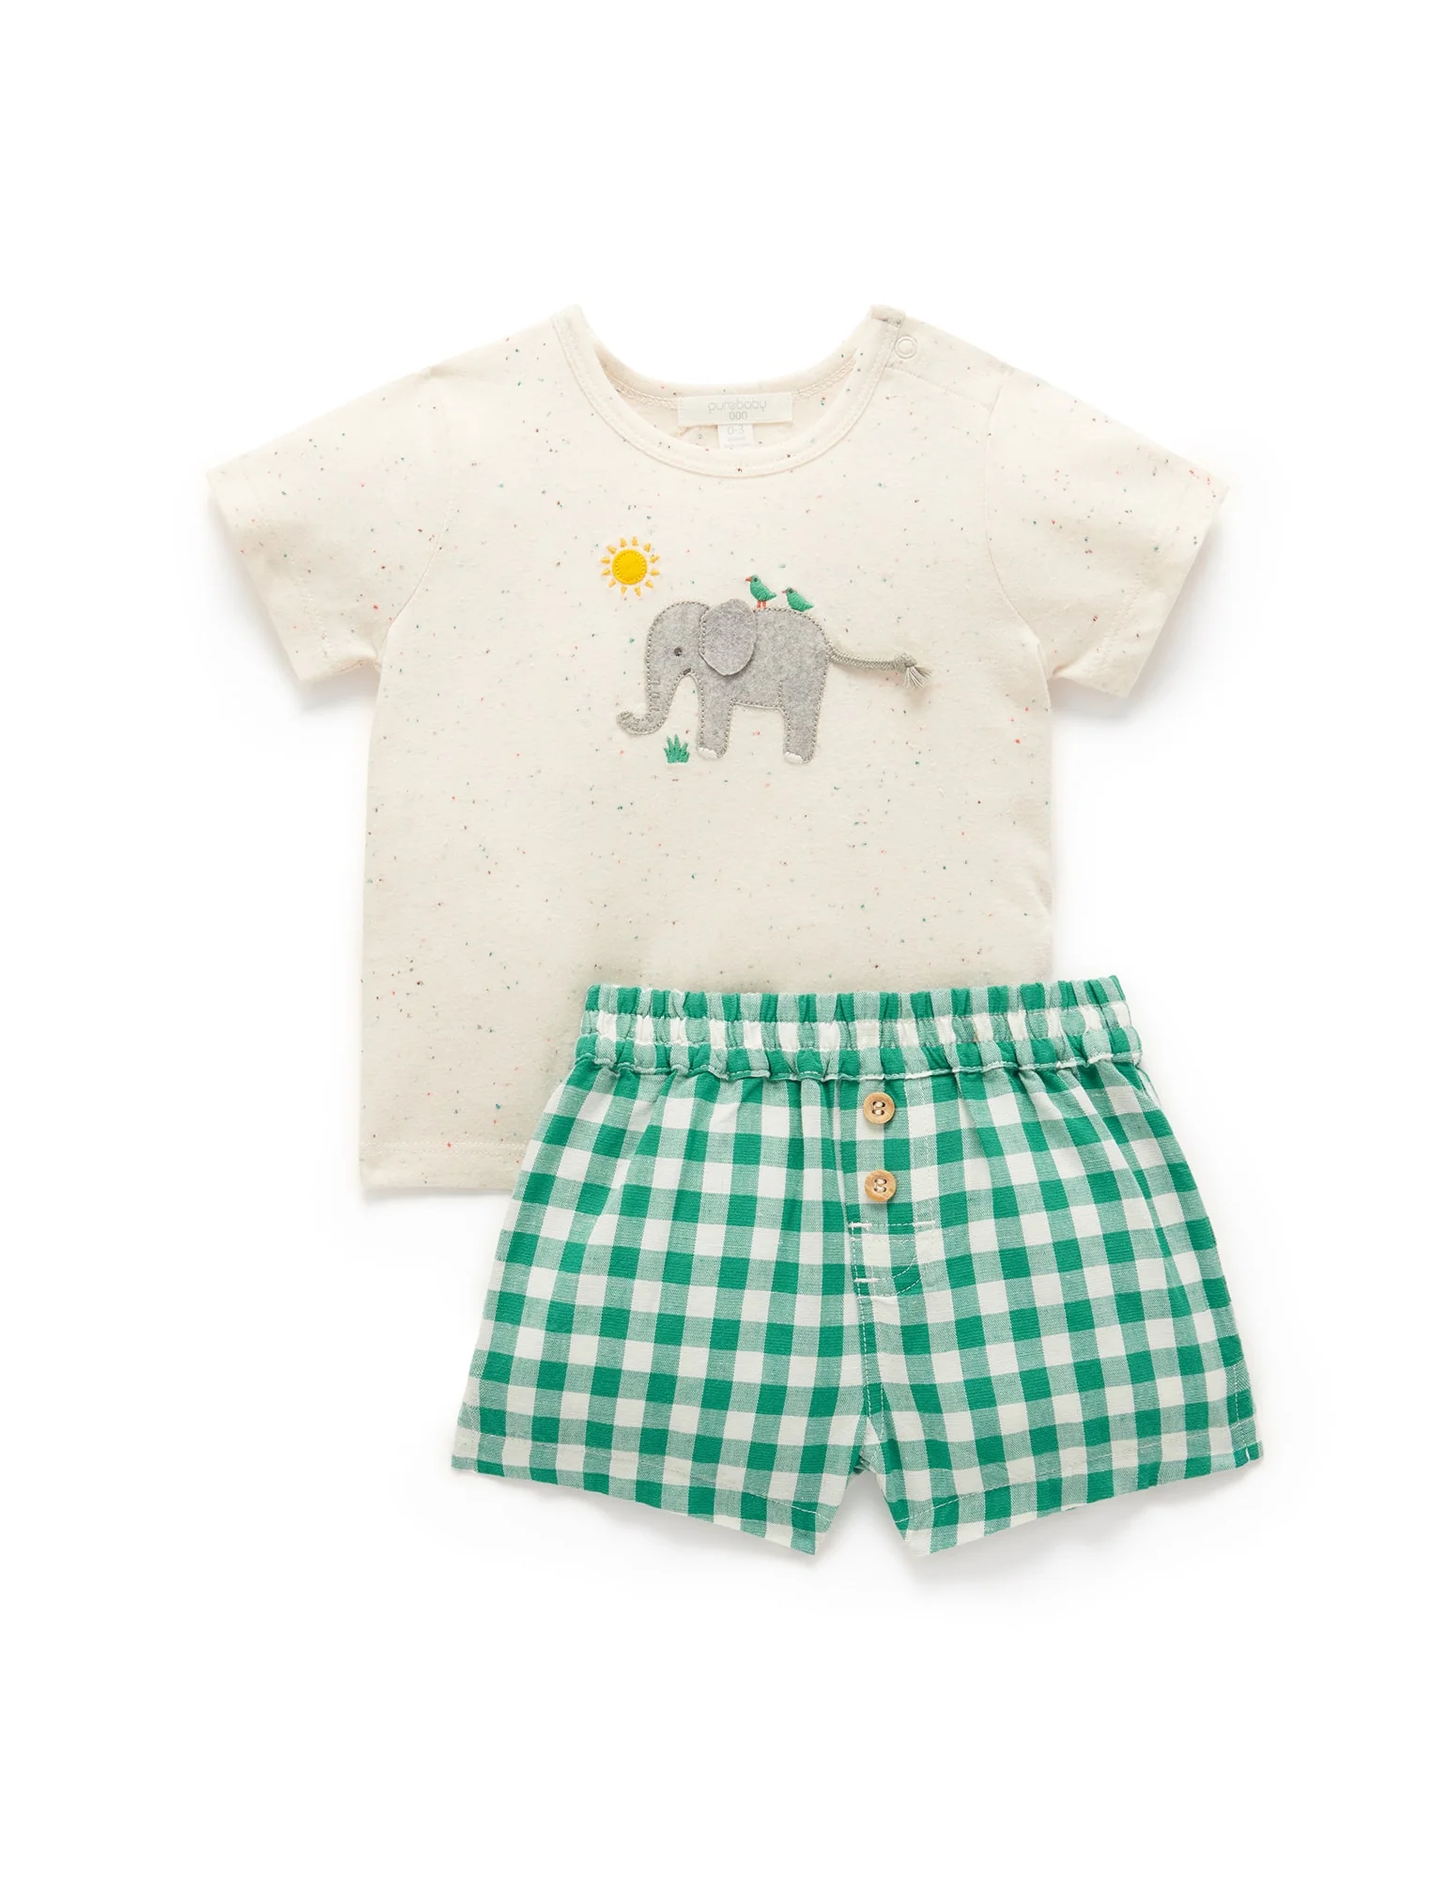 Palm Gingham Tee and Short Set